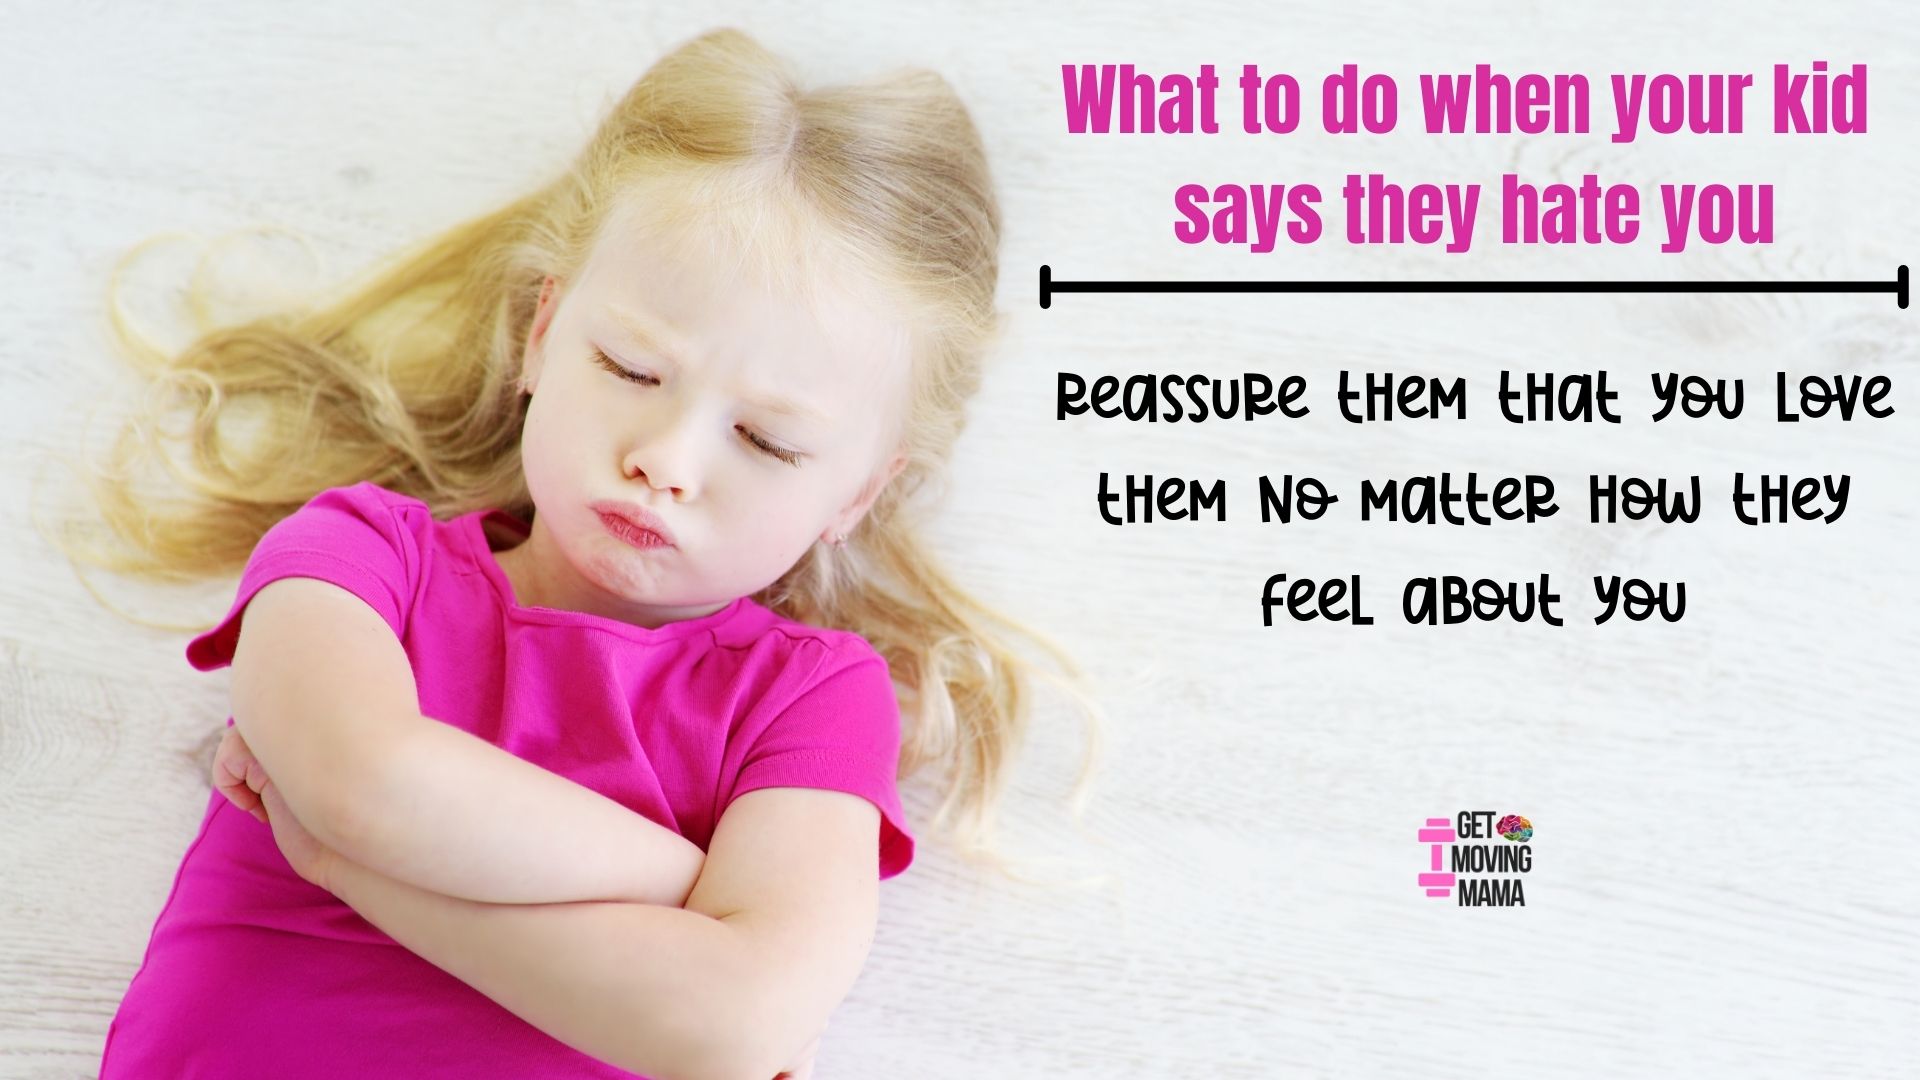 A picture of a young girl having a tantrum with "what to do when your kid says they hate you - reassure them that you love them no matter how they feel about you" in text.